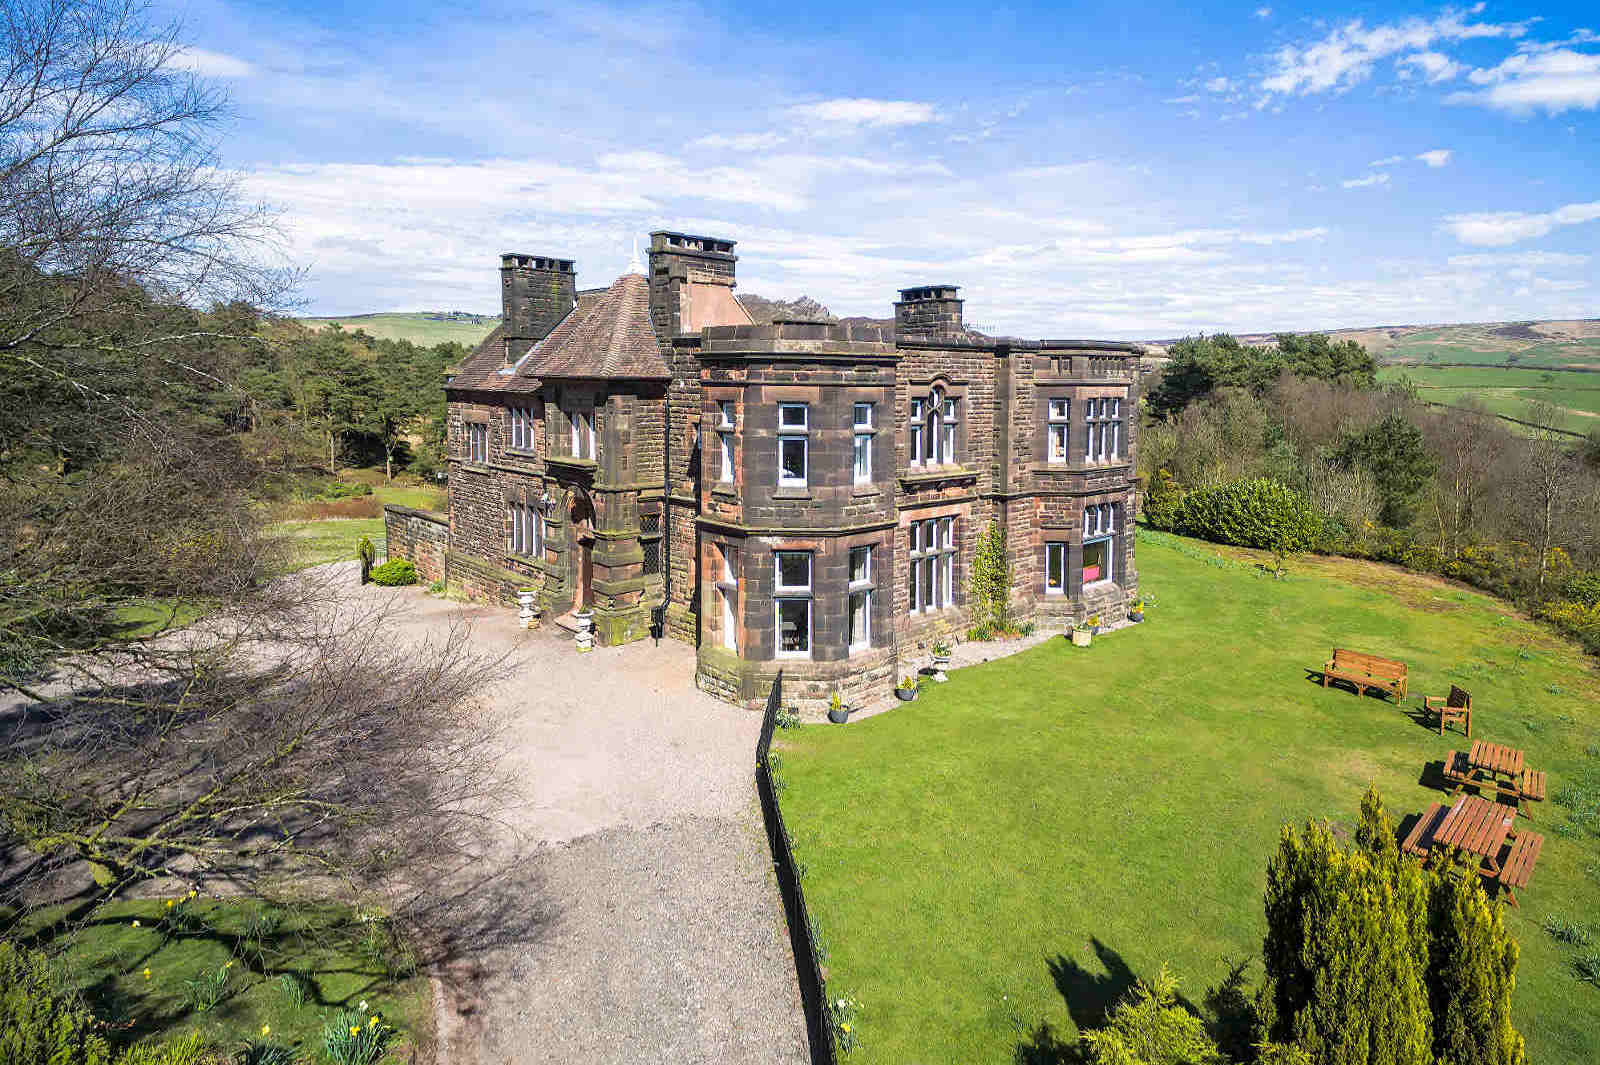 Manors for hire near peak district